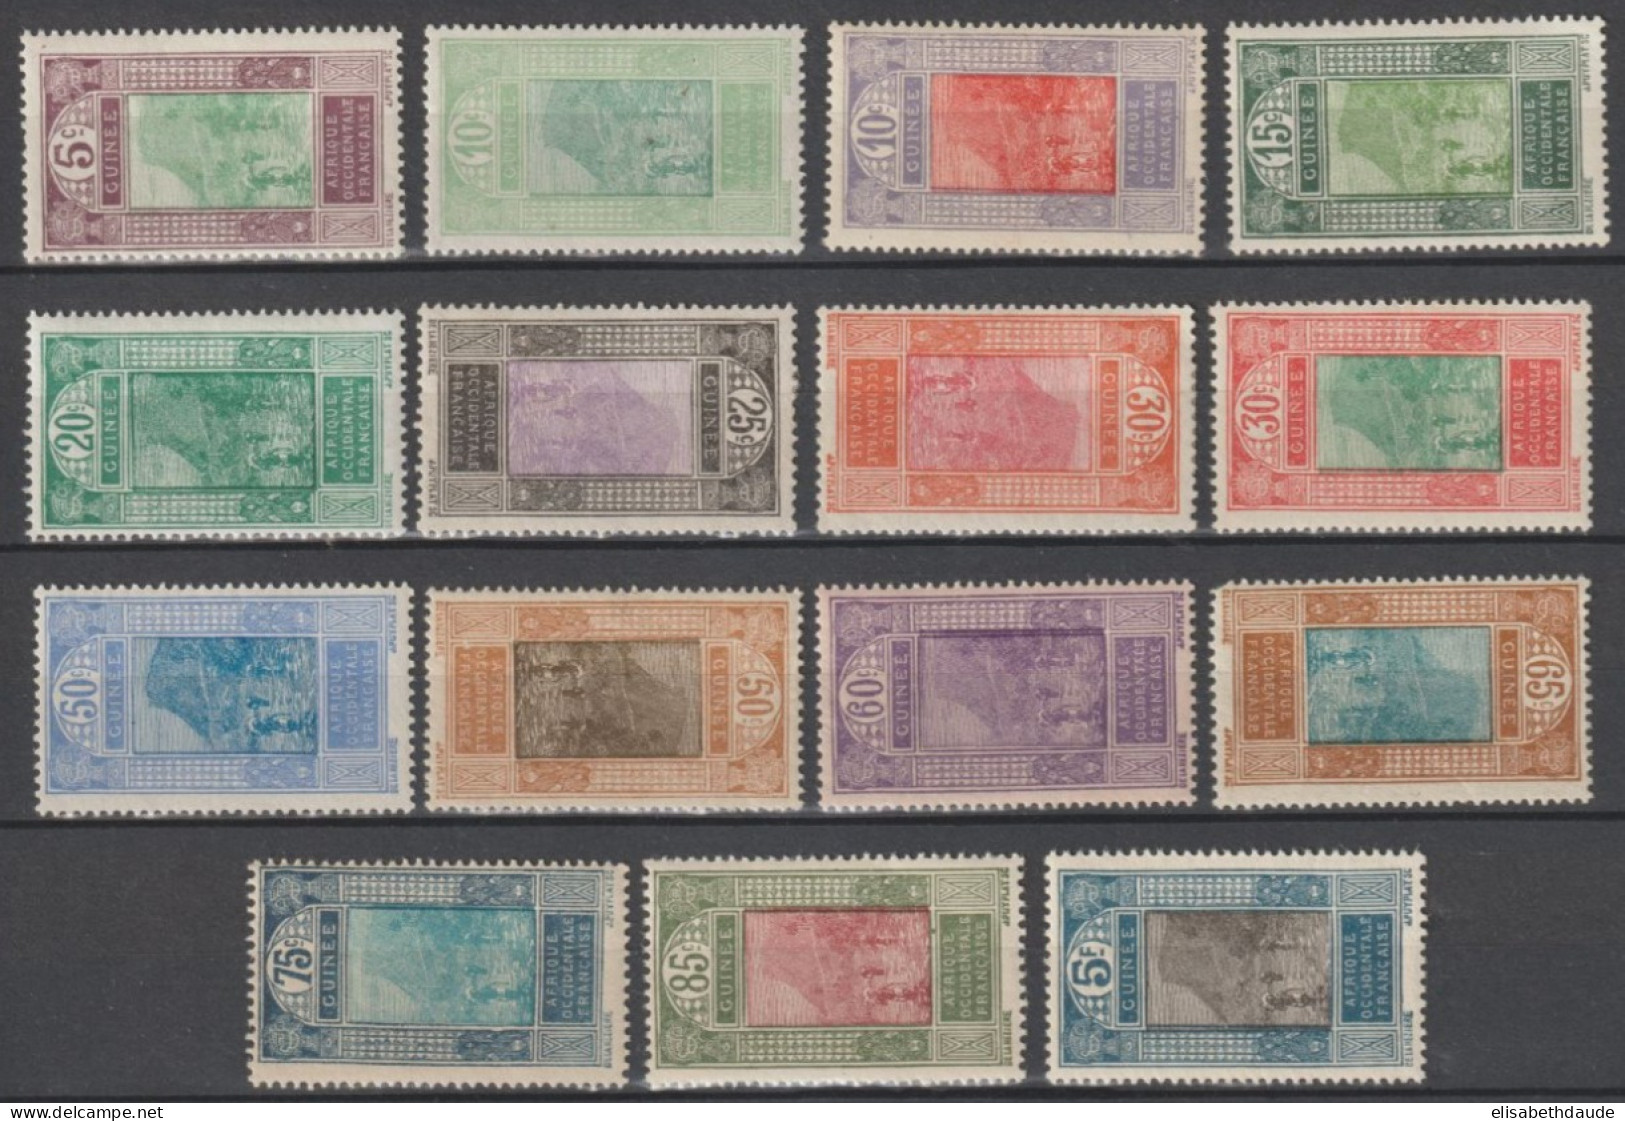 GUINEE - 1922 - SERIE COMPLETE YVERT N°84/98 ** MNH (QUELQUES * MH) - COTE = 22 EUR - Nuovi